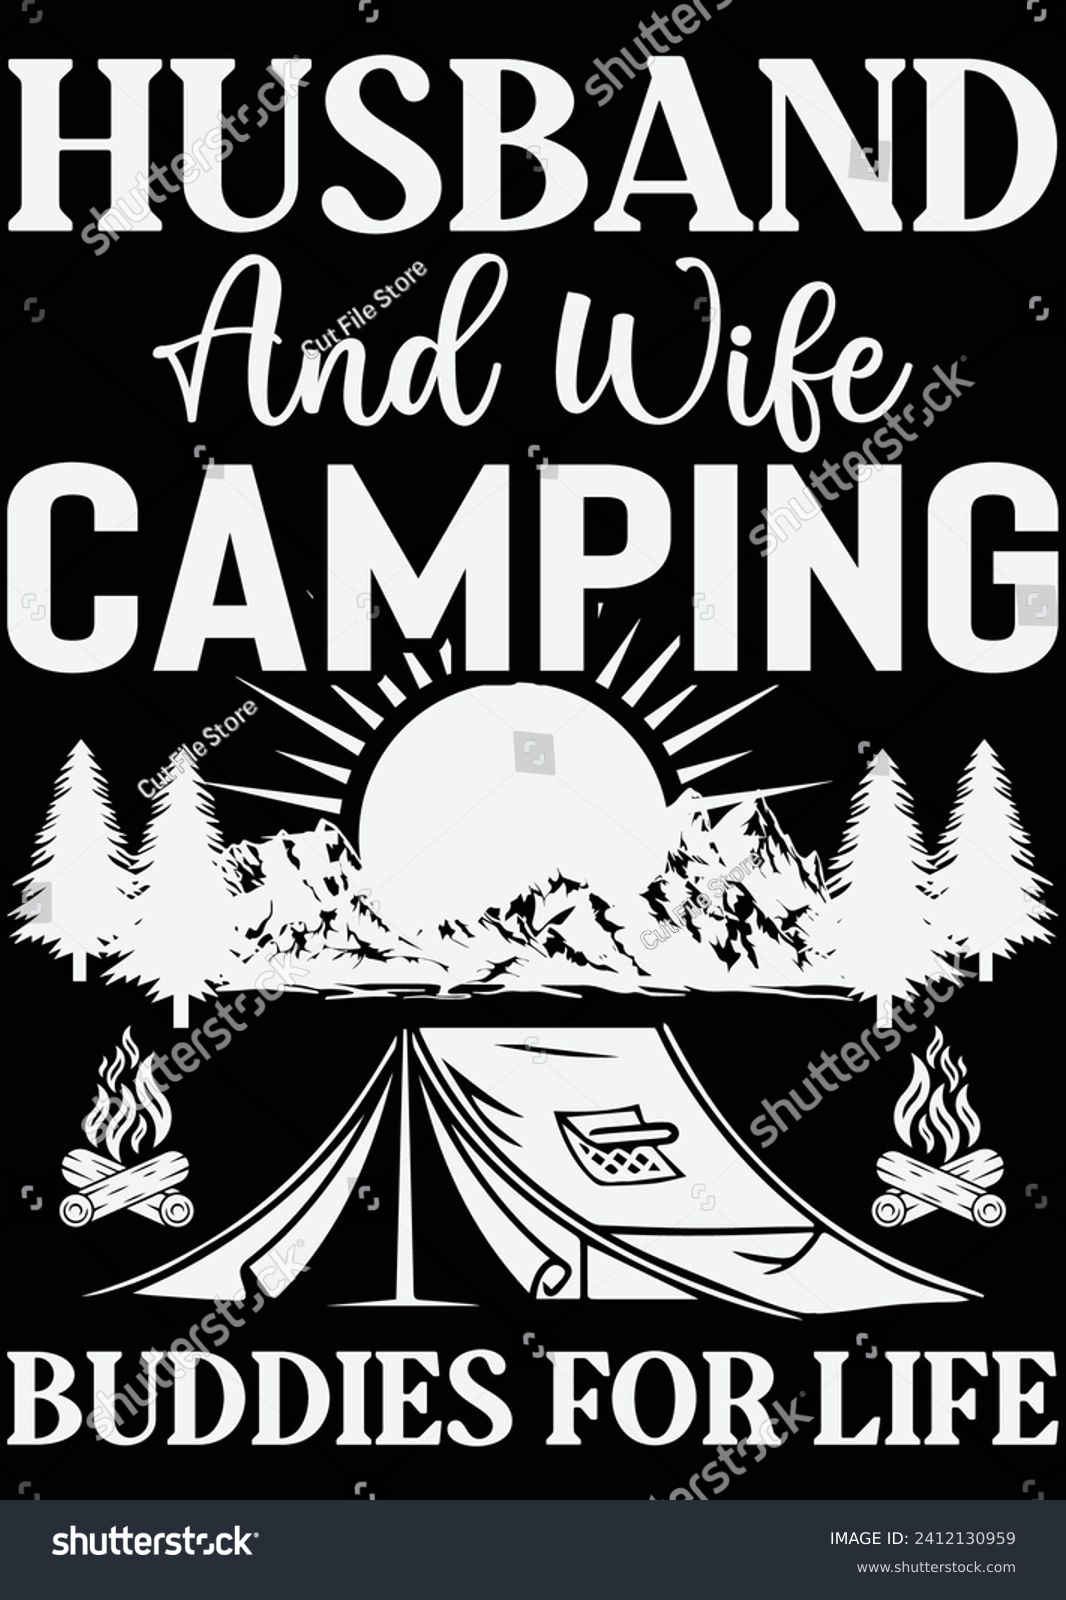 SVG of 
Husband And Wife Camping Buddies eps cut file for cutting machine svg